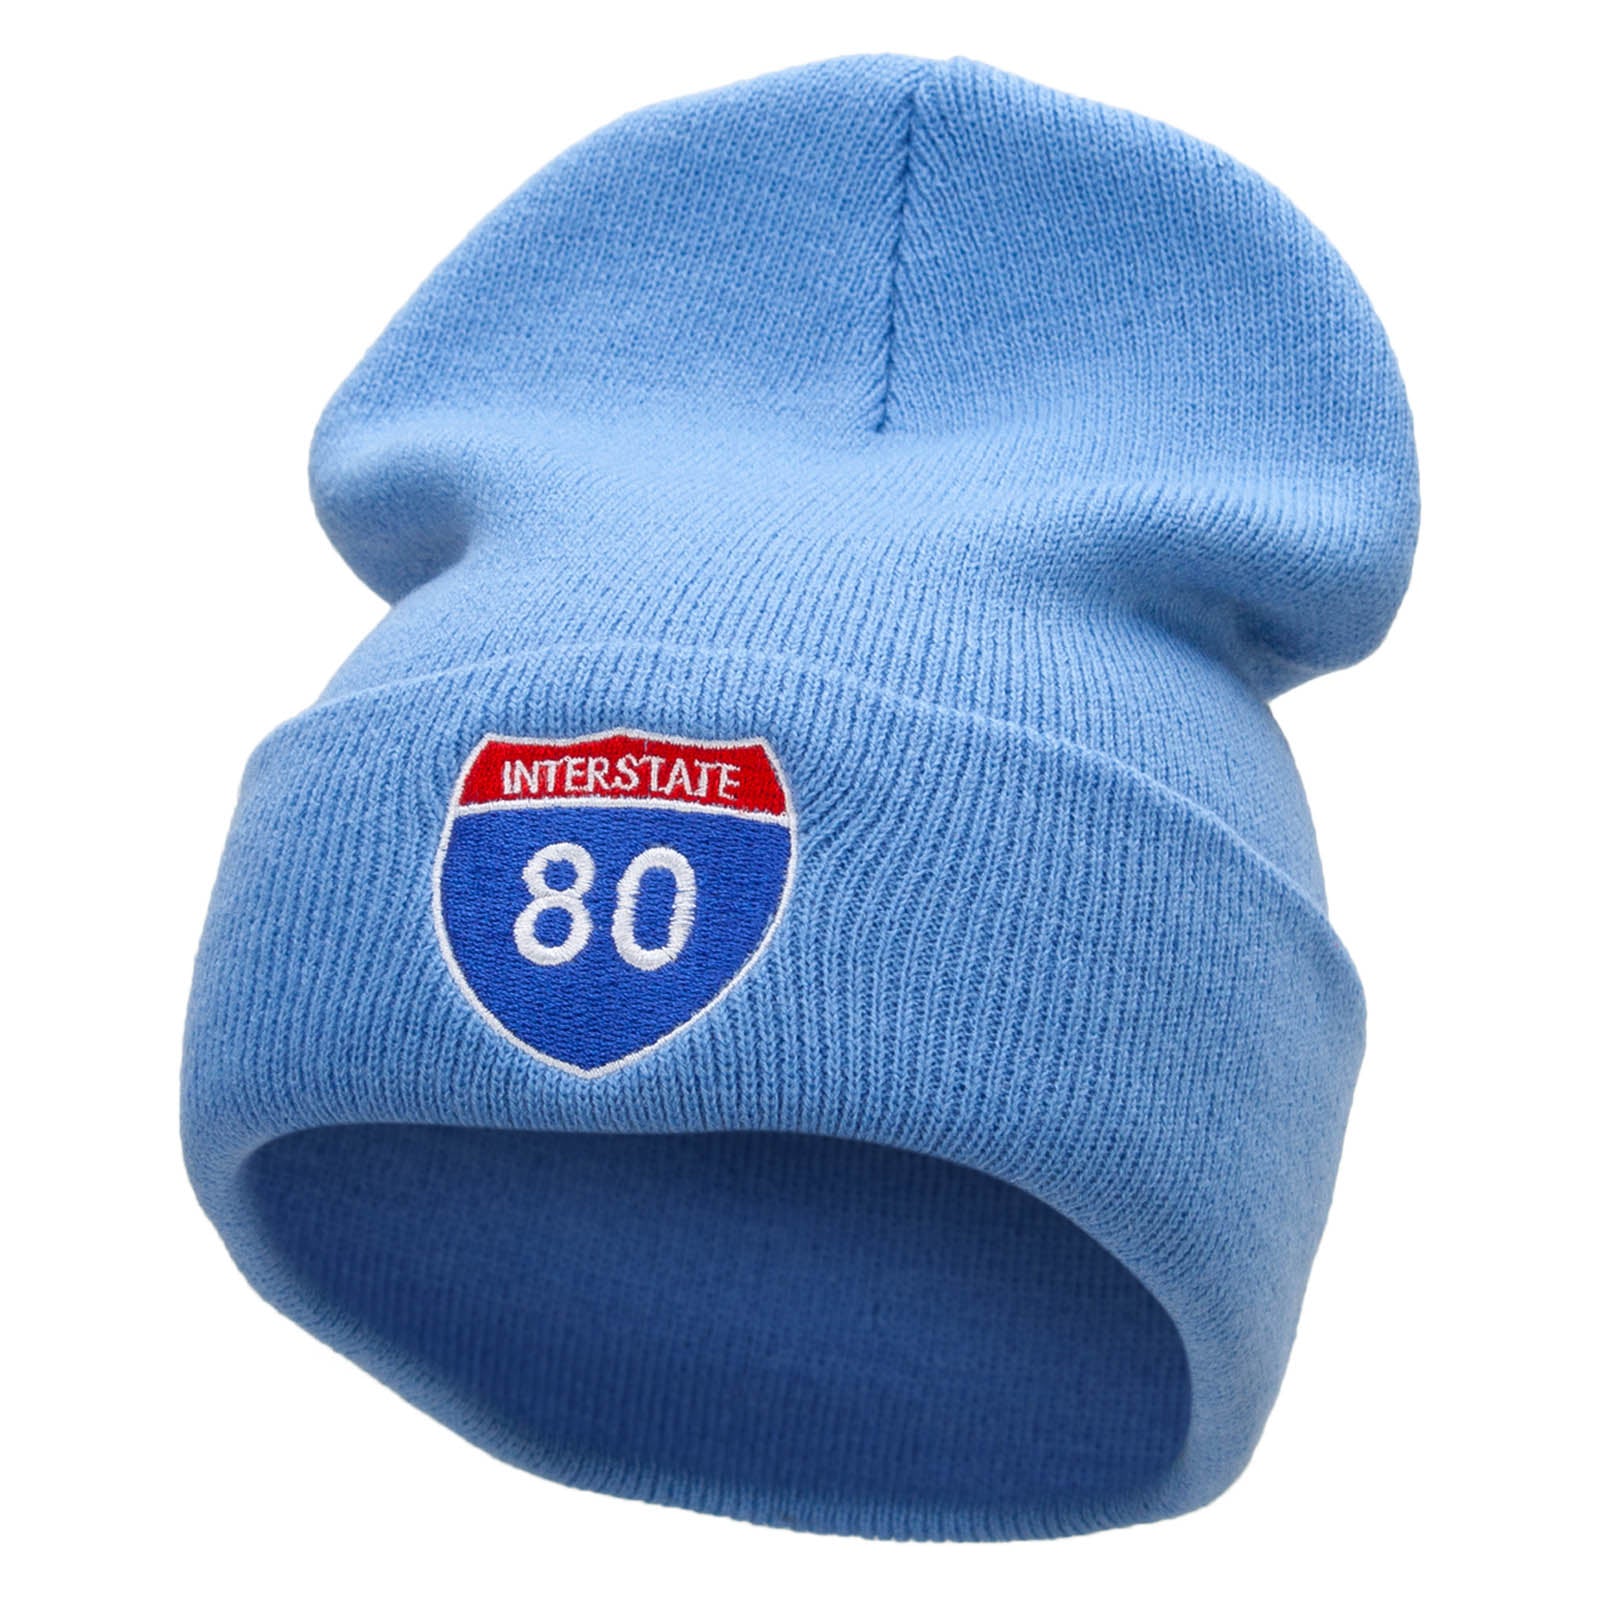 Interstate Highway 80 sign Embroidered 12 Inch Long Knitted Beanie - Sky Blue OSFM